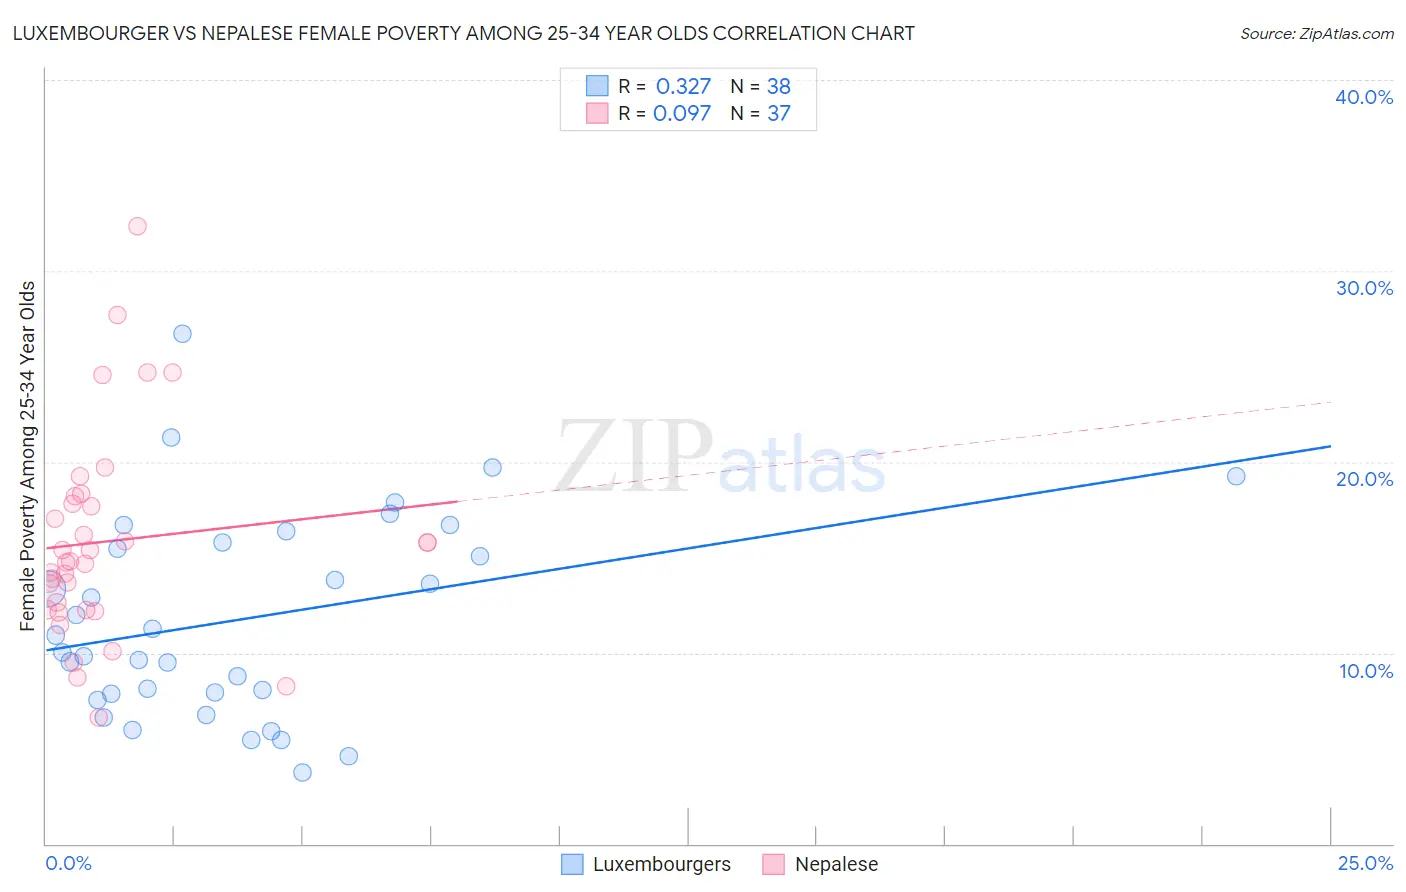 Luxembourger vs Nepalese Female Poverty Among 25-34 Year Olds